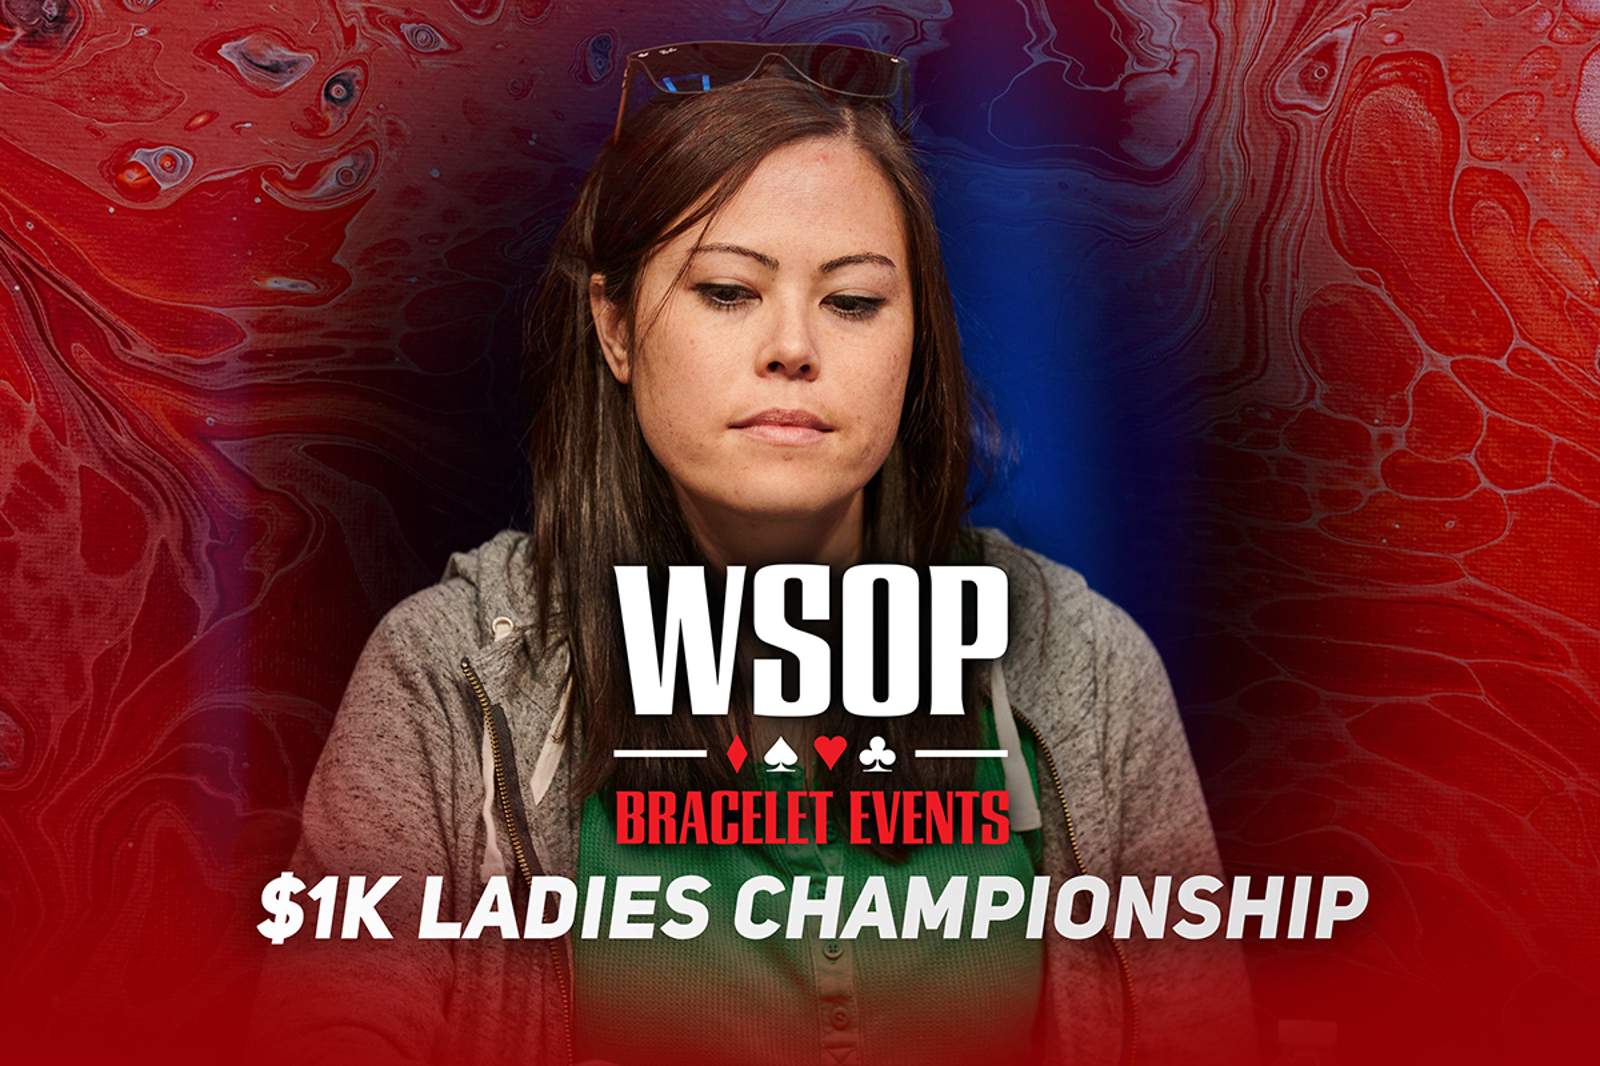 Watch the WSOP Event #22: $1K Ladies Championship Final Table on PokerGO.com at 8 p.m. ET